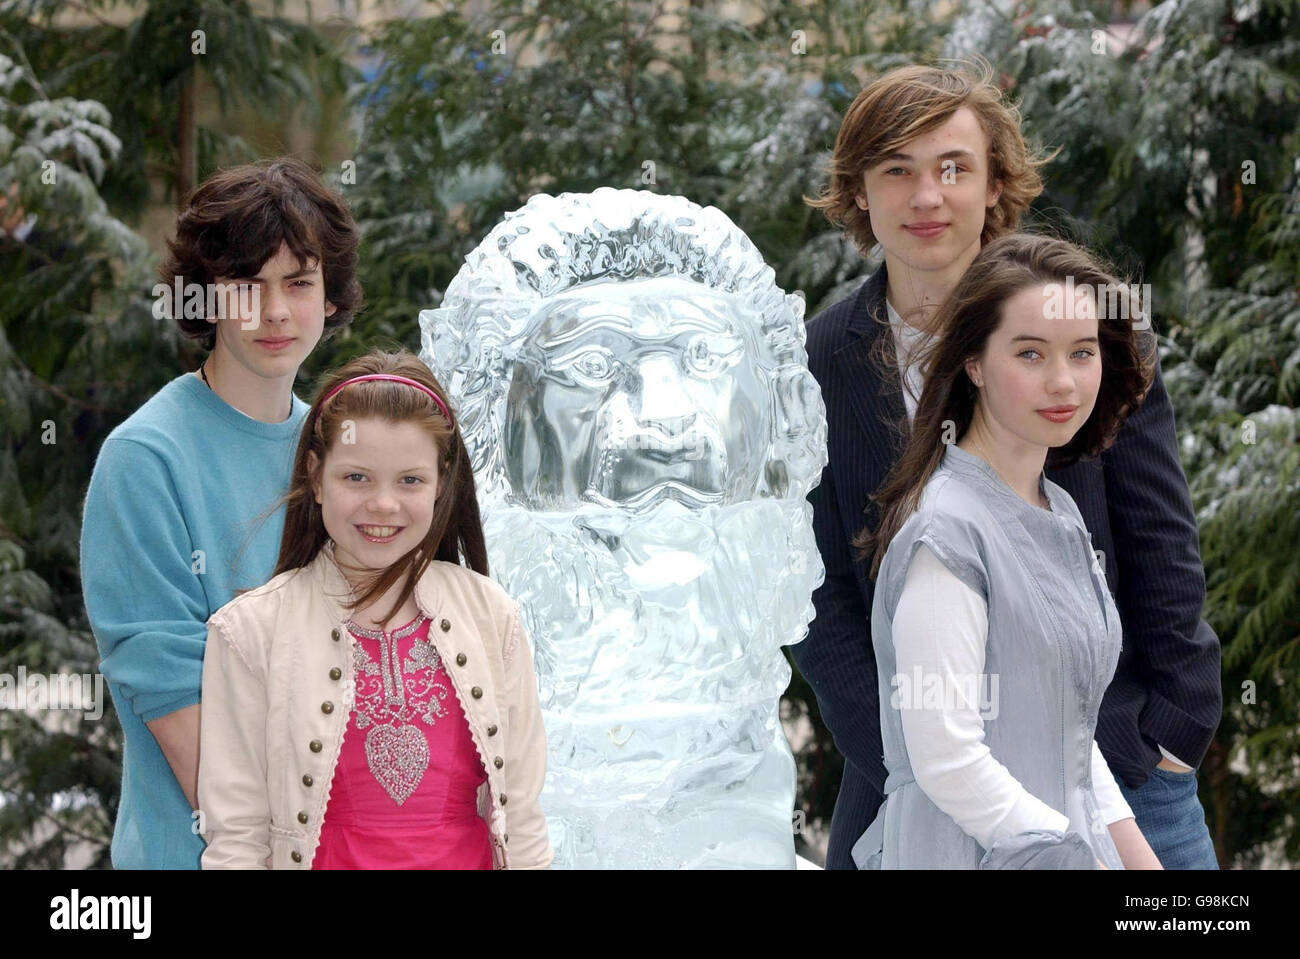 The 'Pevensie children' from 'The Chronicles of Narnia', (L-R) Skandar Keynes, Georgie Henley, William Moseley and Anna Popplewell, stand alongside a life-size 70 stone ice sculpture of 'Aslan' at a photocall to mark Disney's April 3rd DVD release of the movie, at the Ballroom, County Hall, south London, Wednesday 29 March 2006. PRESS ASSOCIATION Photo. Photo credit should read: Anthony Harvey/PA Stock Photo